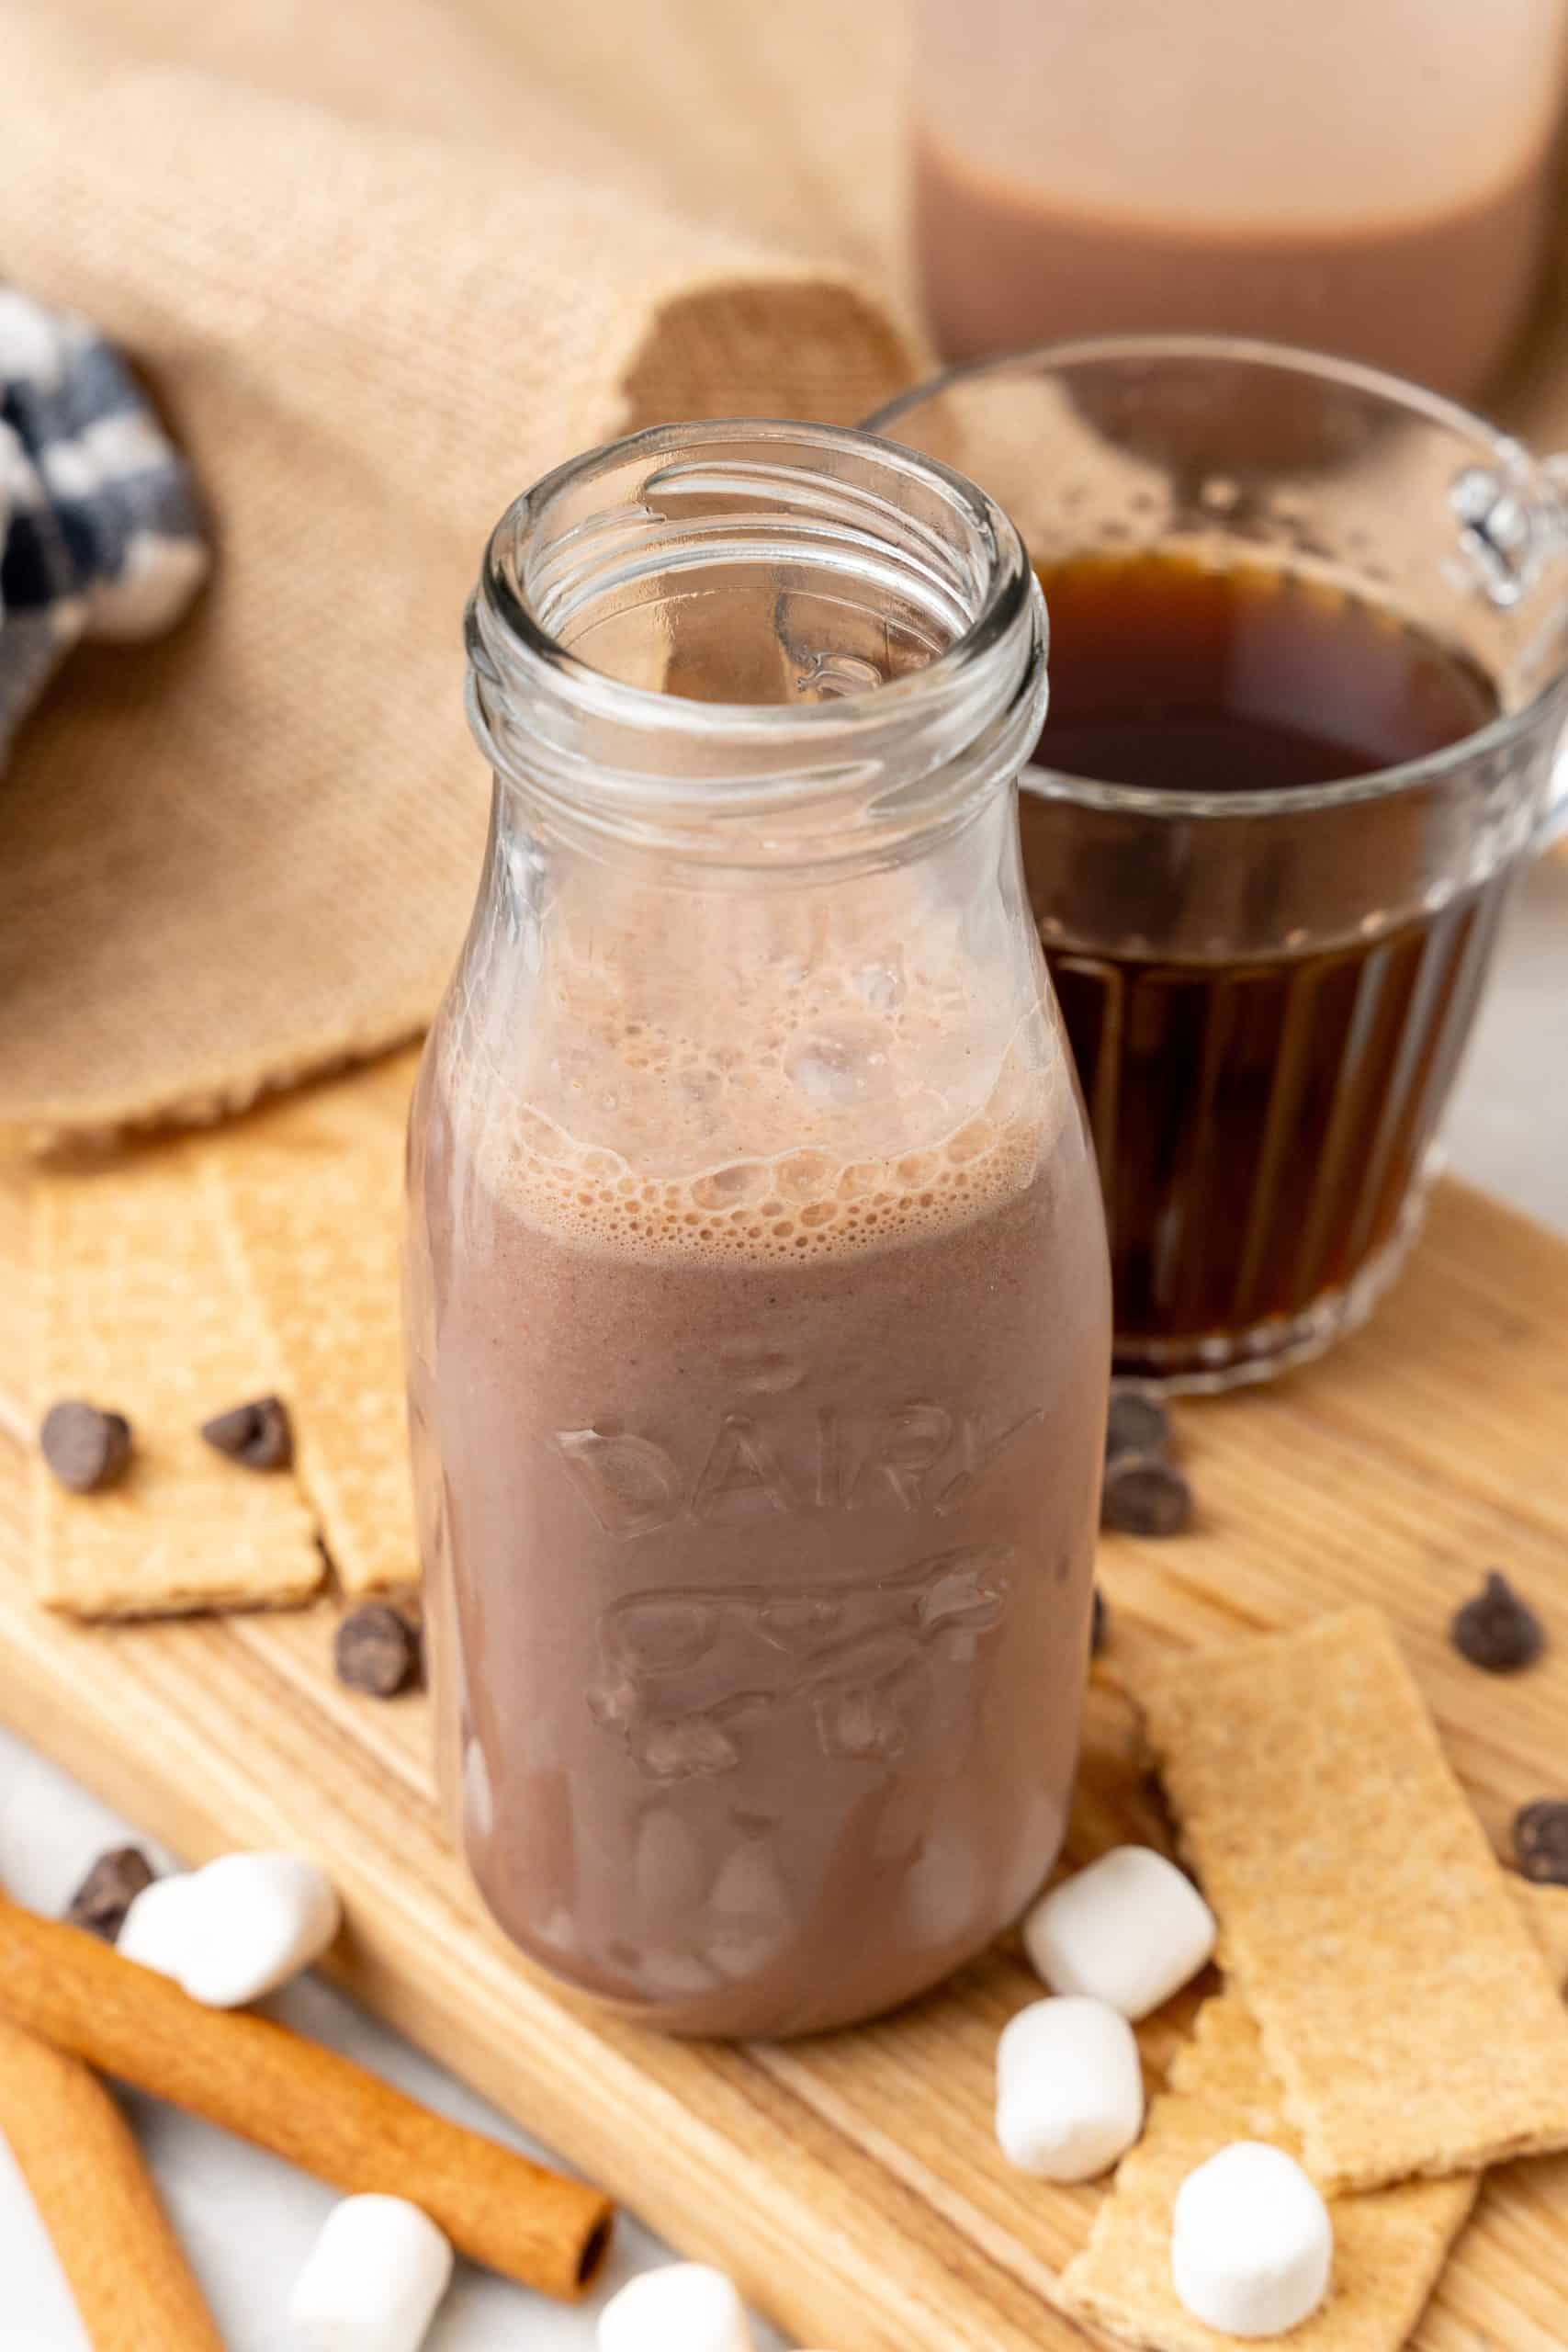 s'mores coffee creamer in a small glass jar sitting on a wooden cutting board